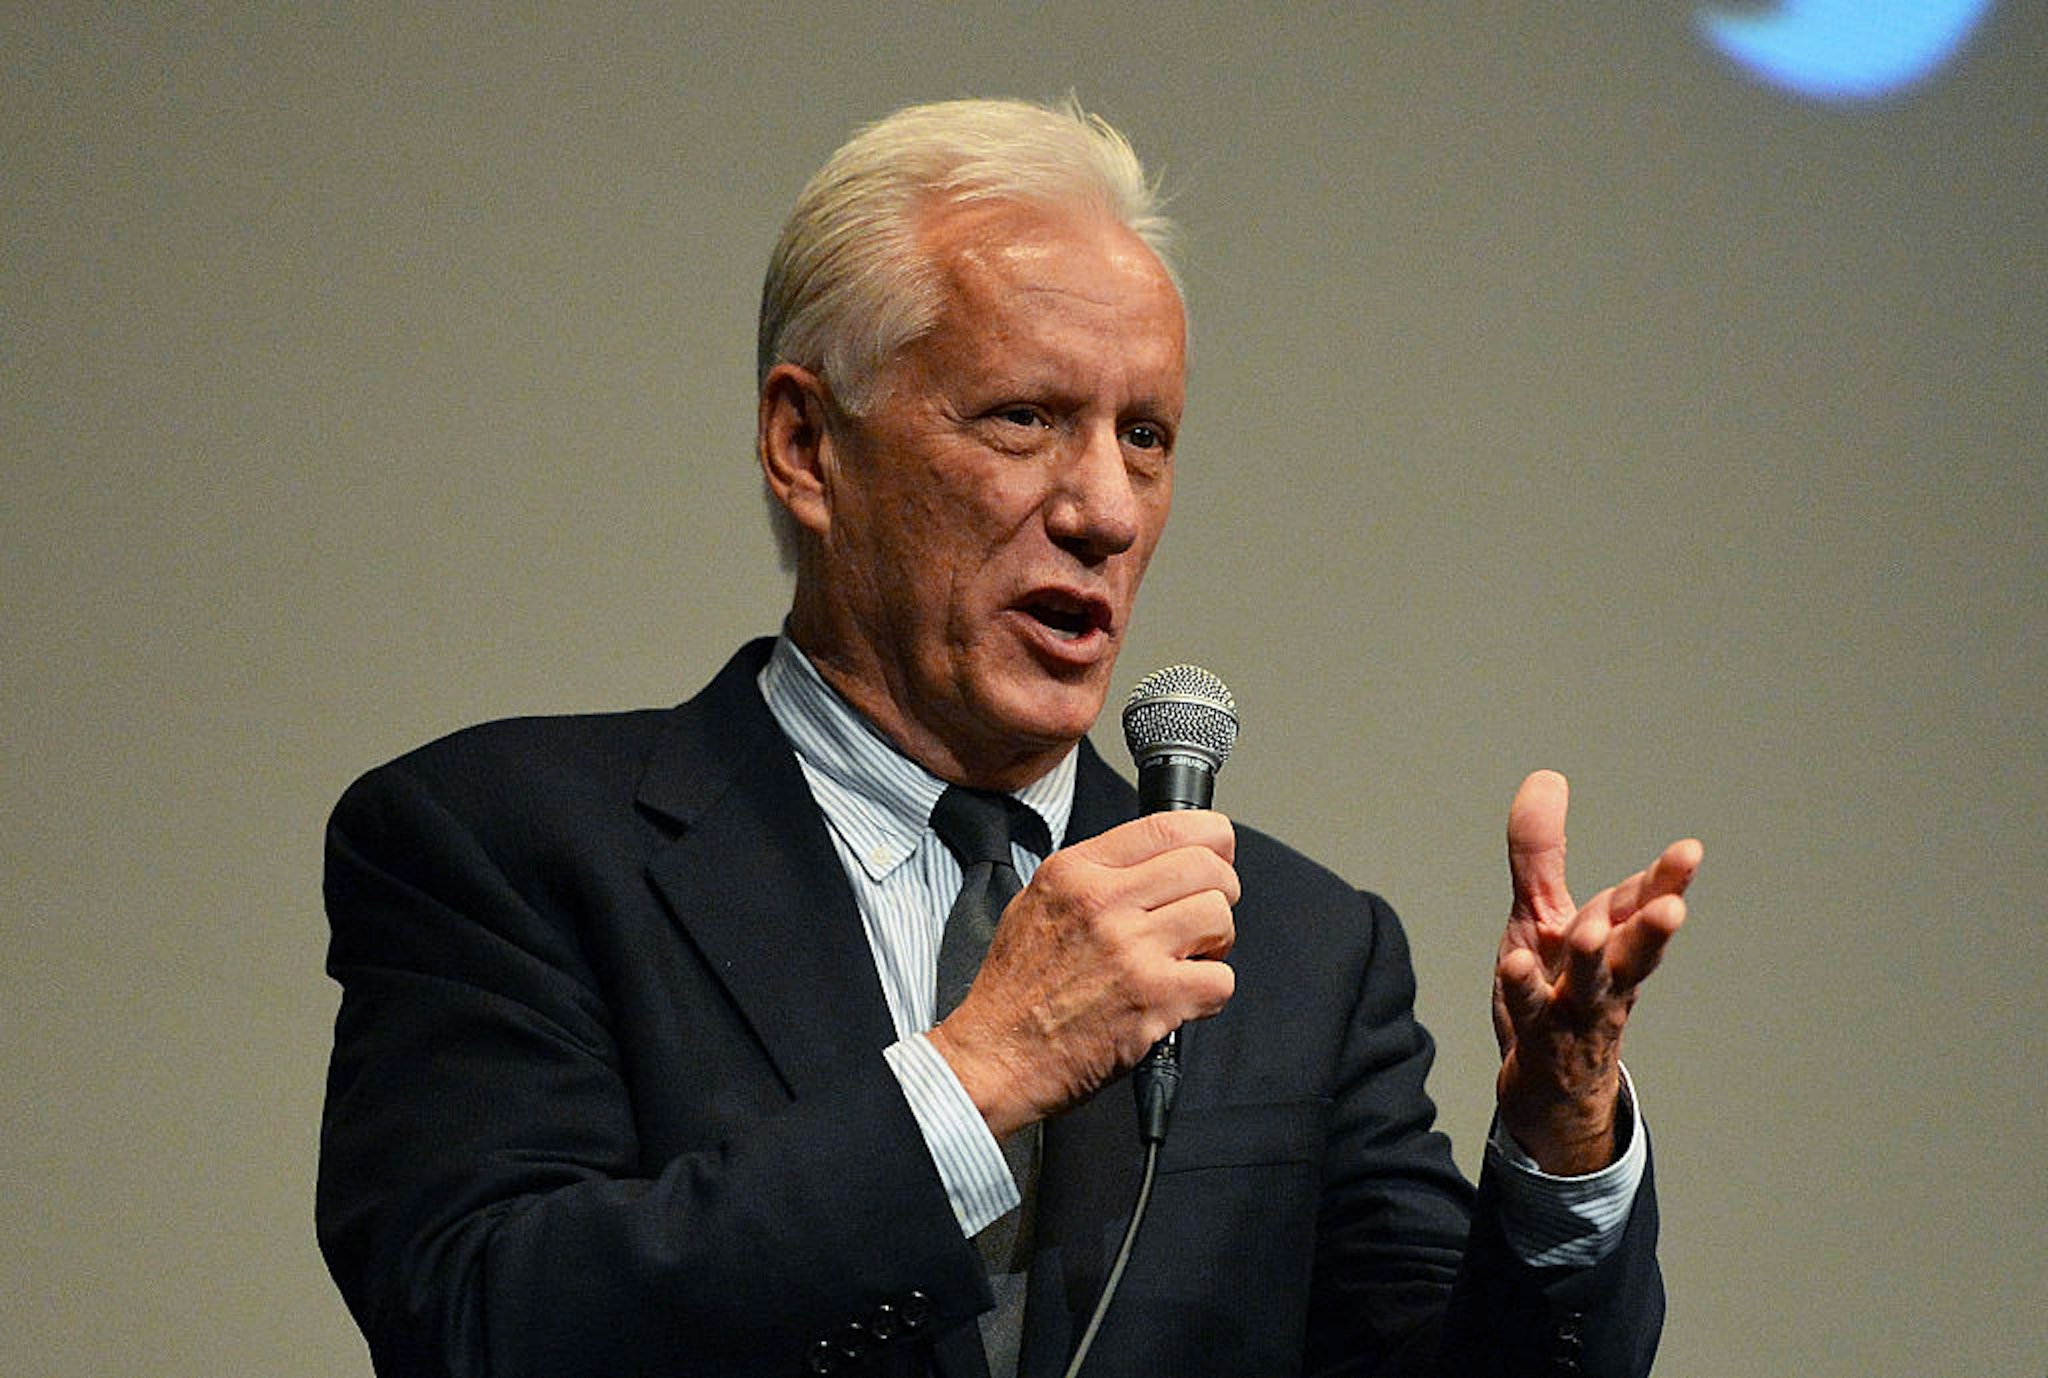 "Once Upon A Time In America" cast member James Woods attends the 52nd New York Film Festival at Walter Reade Theater on September 27, 2014 in New York City.